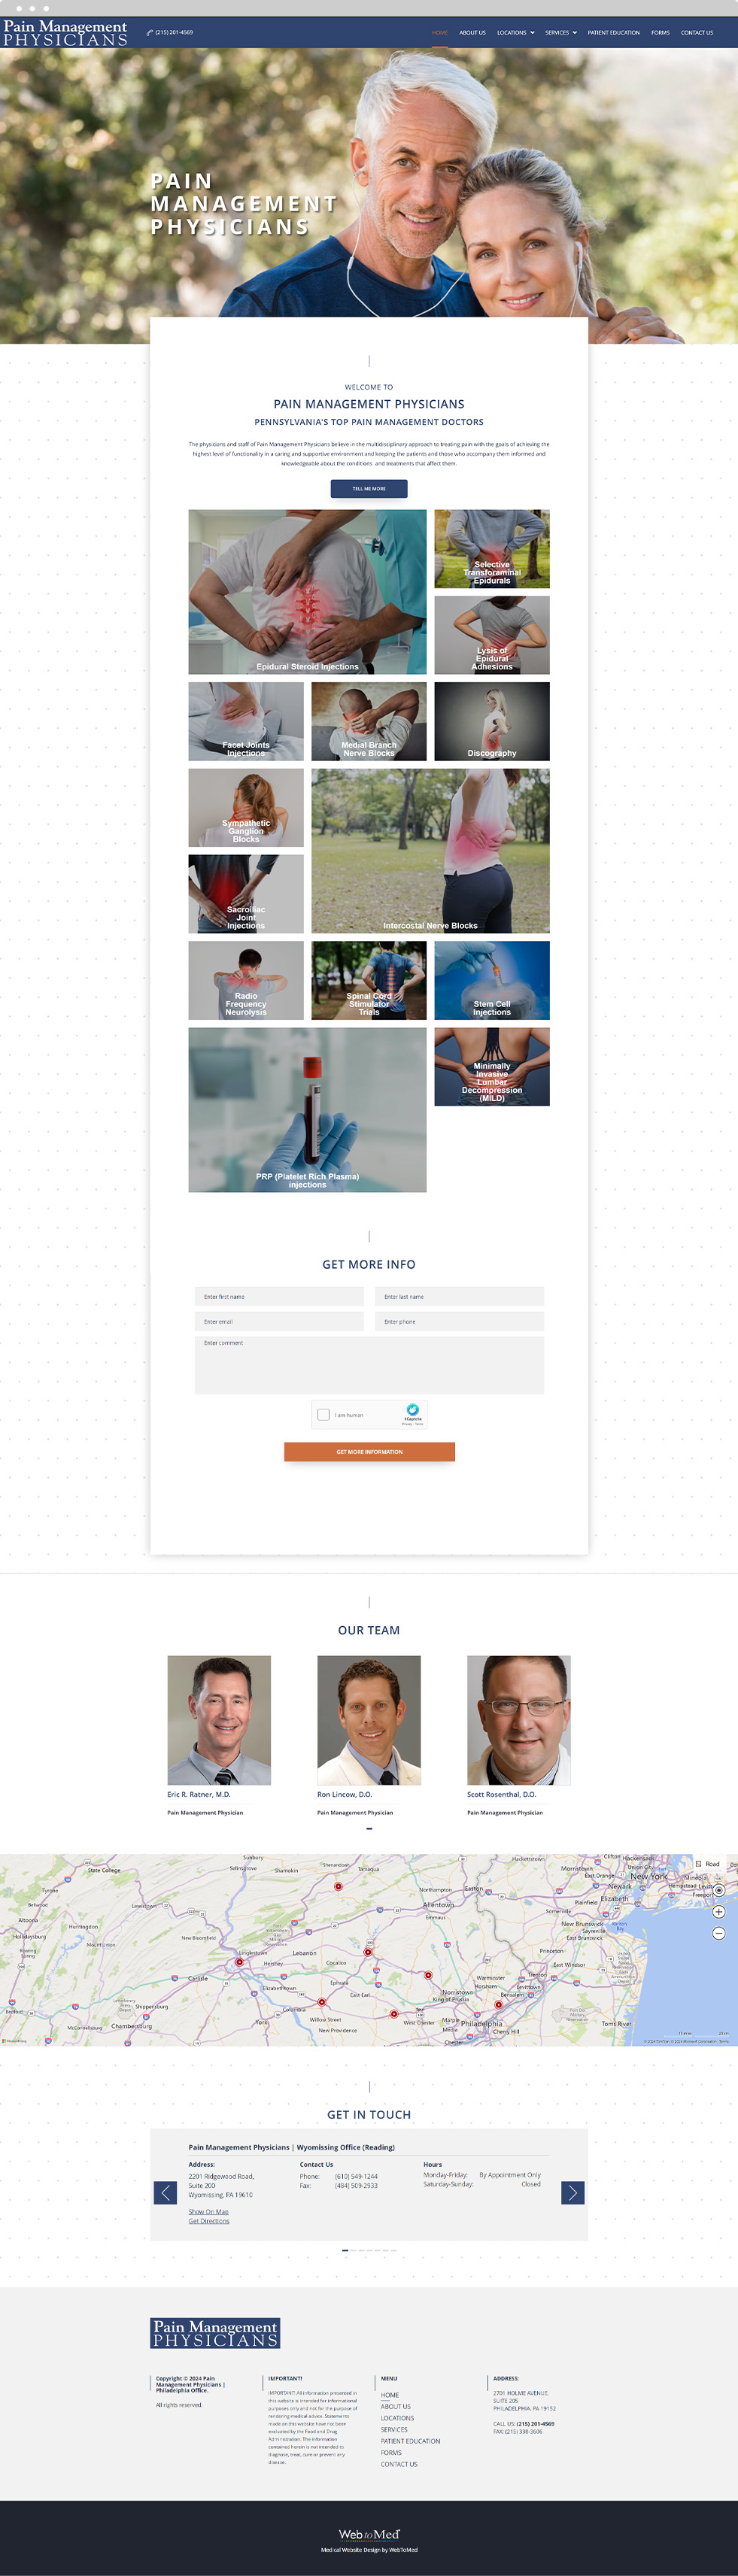 Orthopedic Website Design - Pain Management Physicians - Homepage